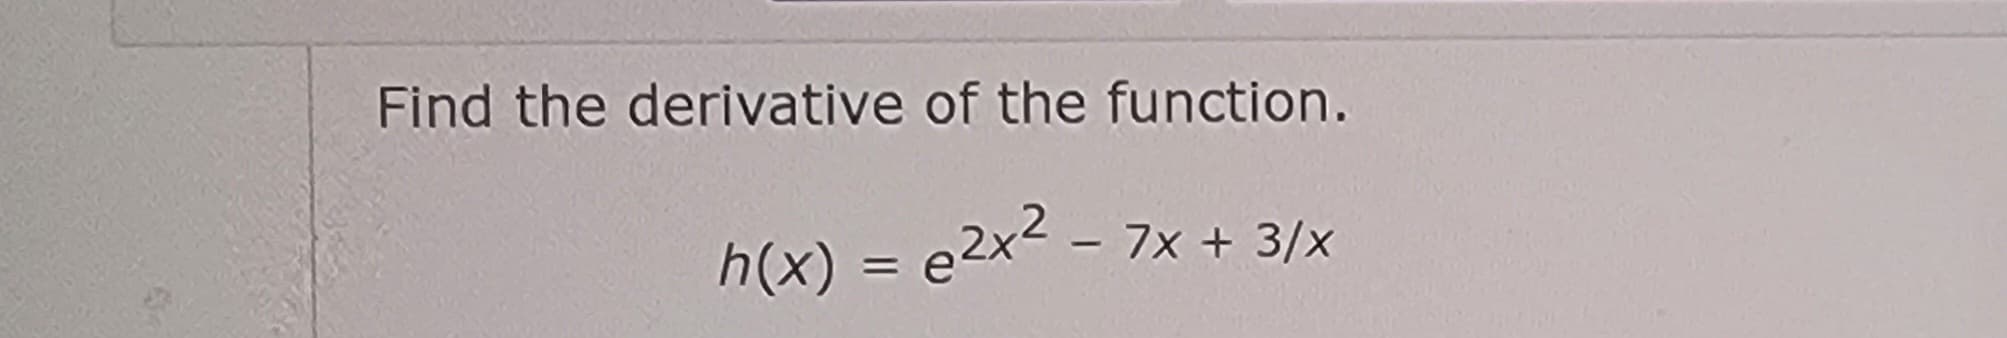 Find the derivative of the function.
h(x) = ²x² - 7x + 3/x